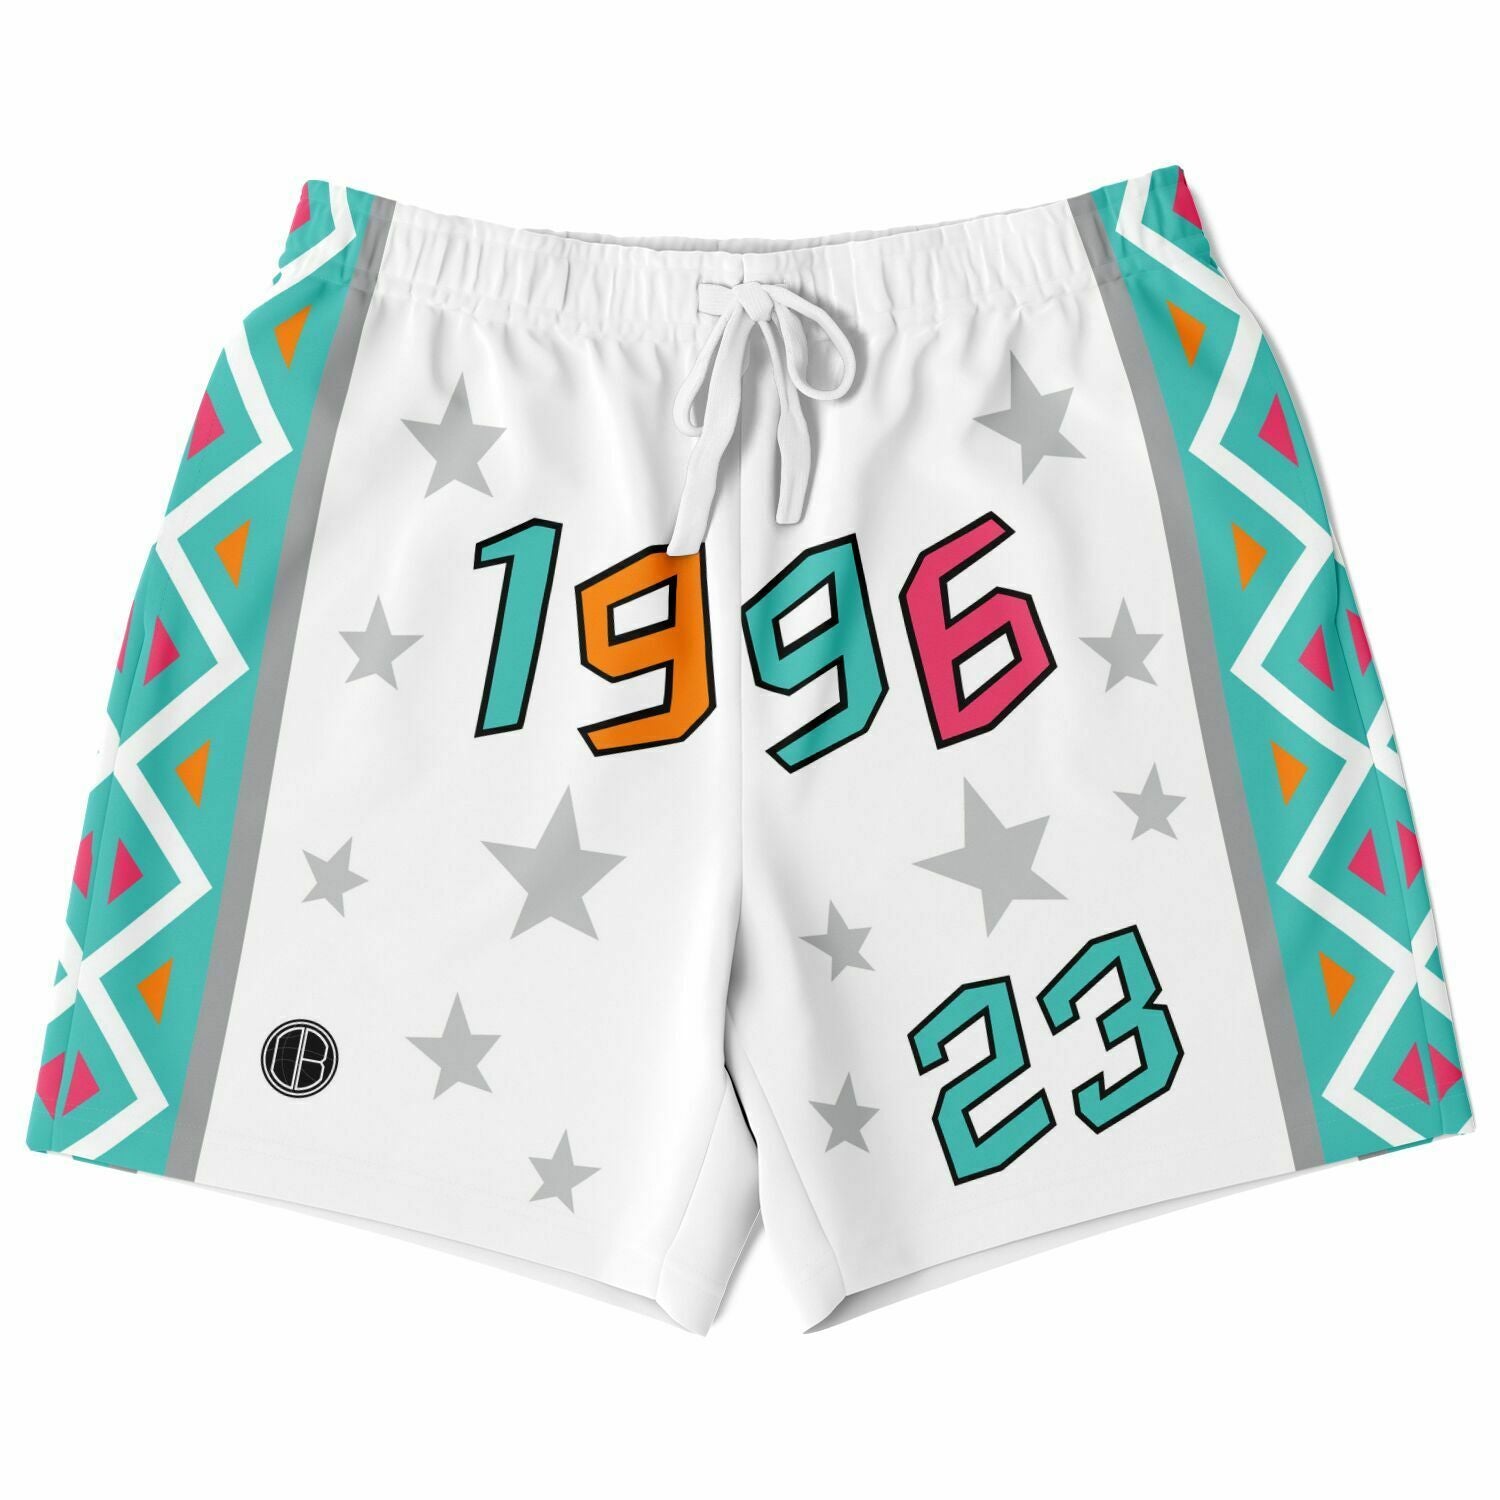 DearBBall Fashion Short - 1996 ALL STAR GAME White Limited Edition